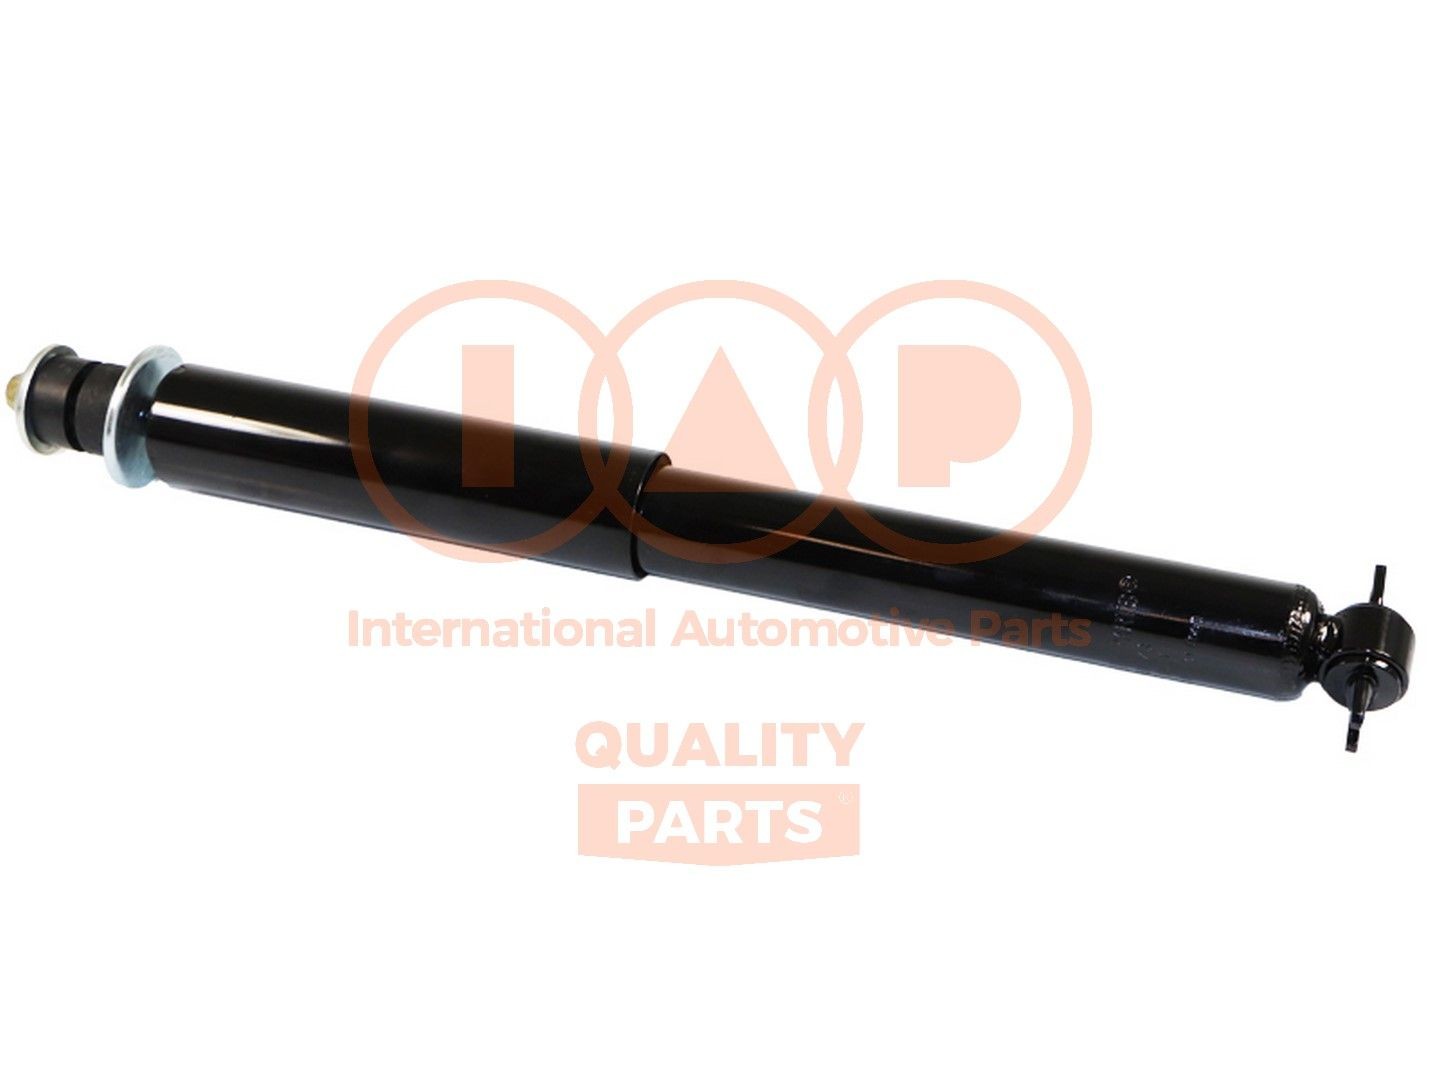 IAP QUALITY PARTS 504-10043 Shock absorber 5014731AM